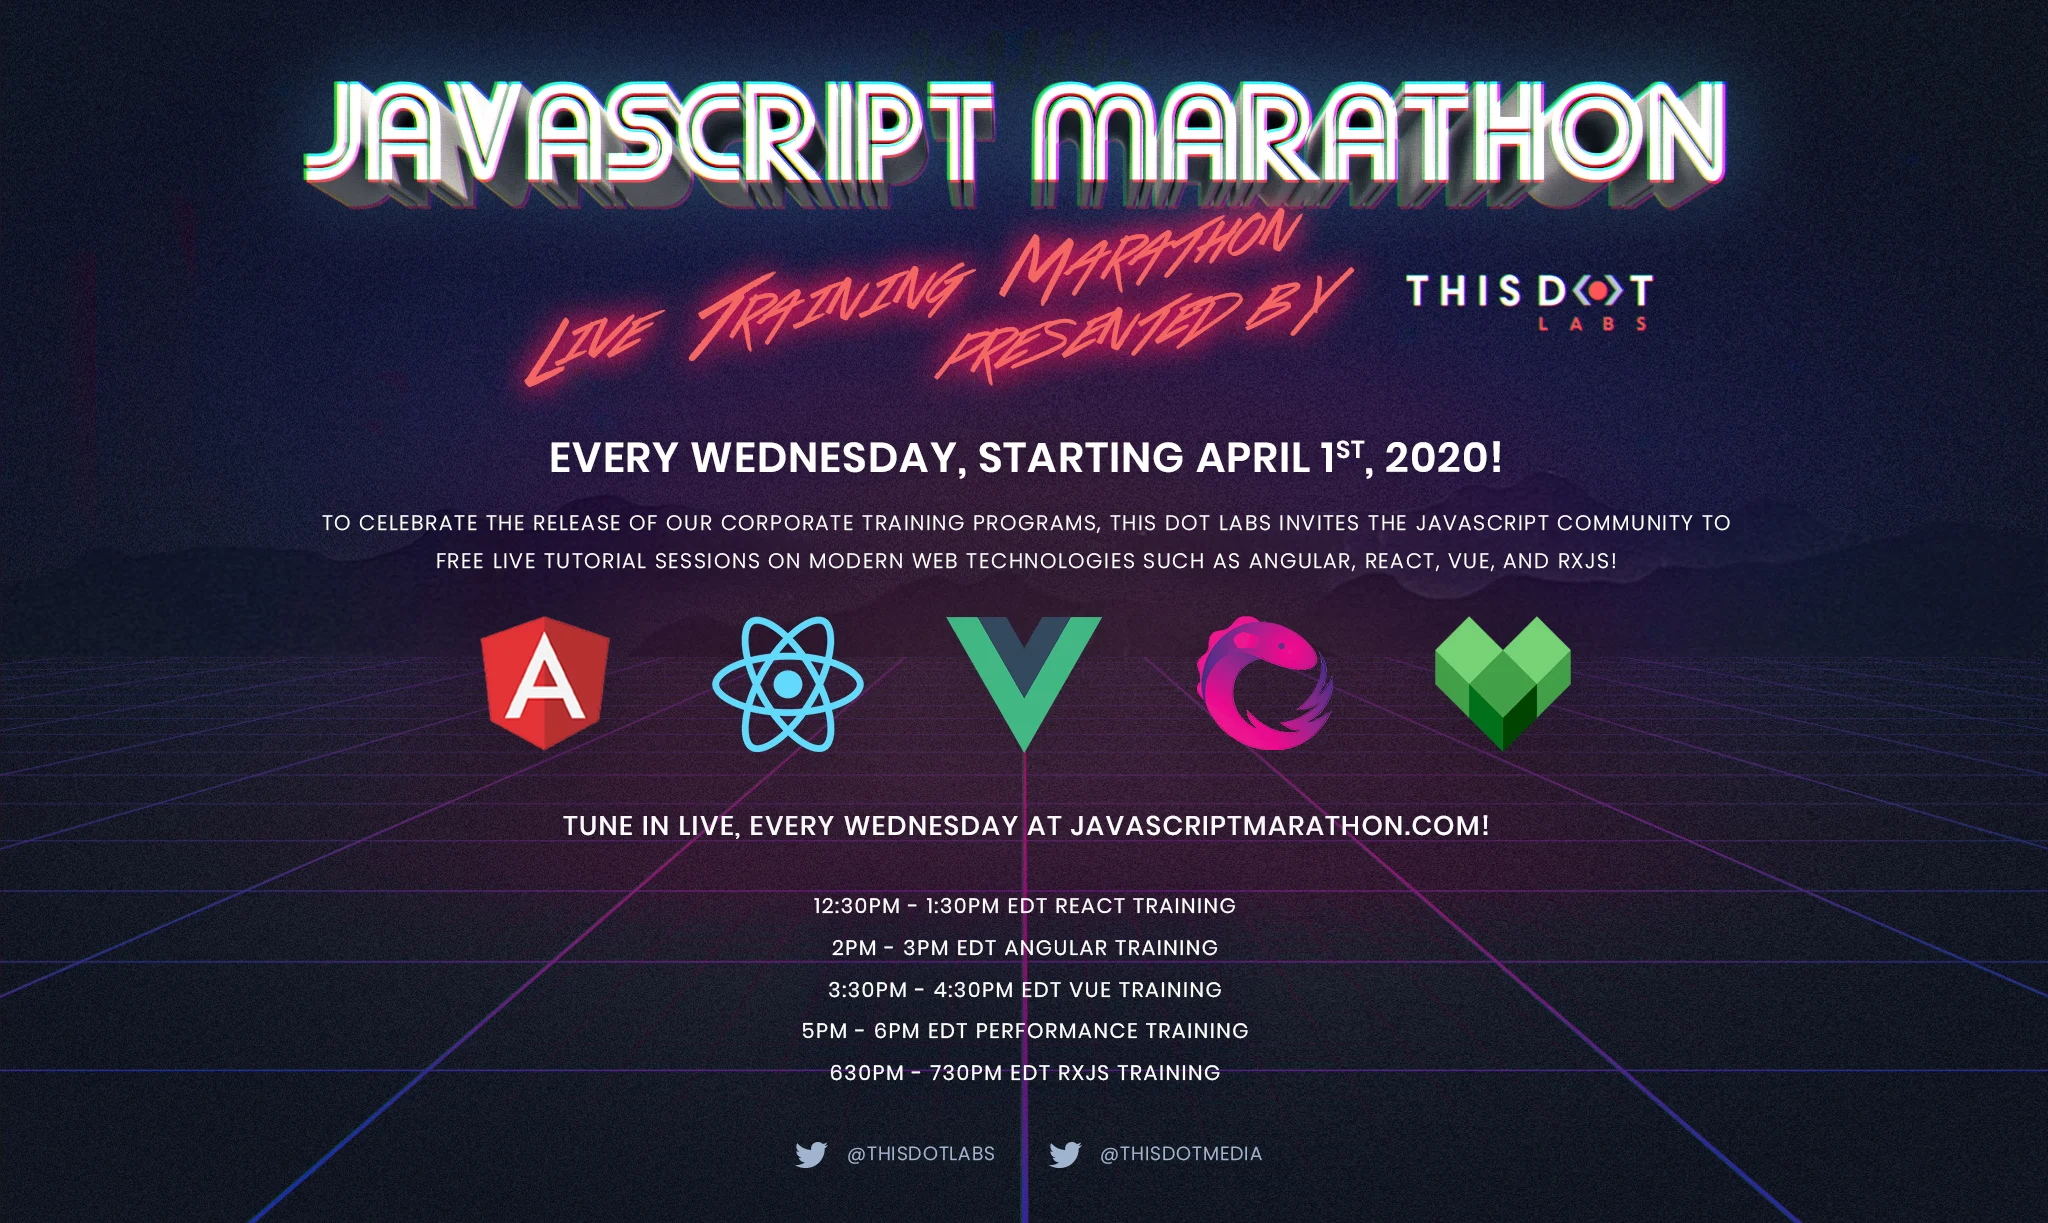 Announcing Free JavaScript Training During the JavaScript Marathon - This Dot Celebrates Remote Corporate Training Courses with Free Classes All April